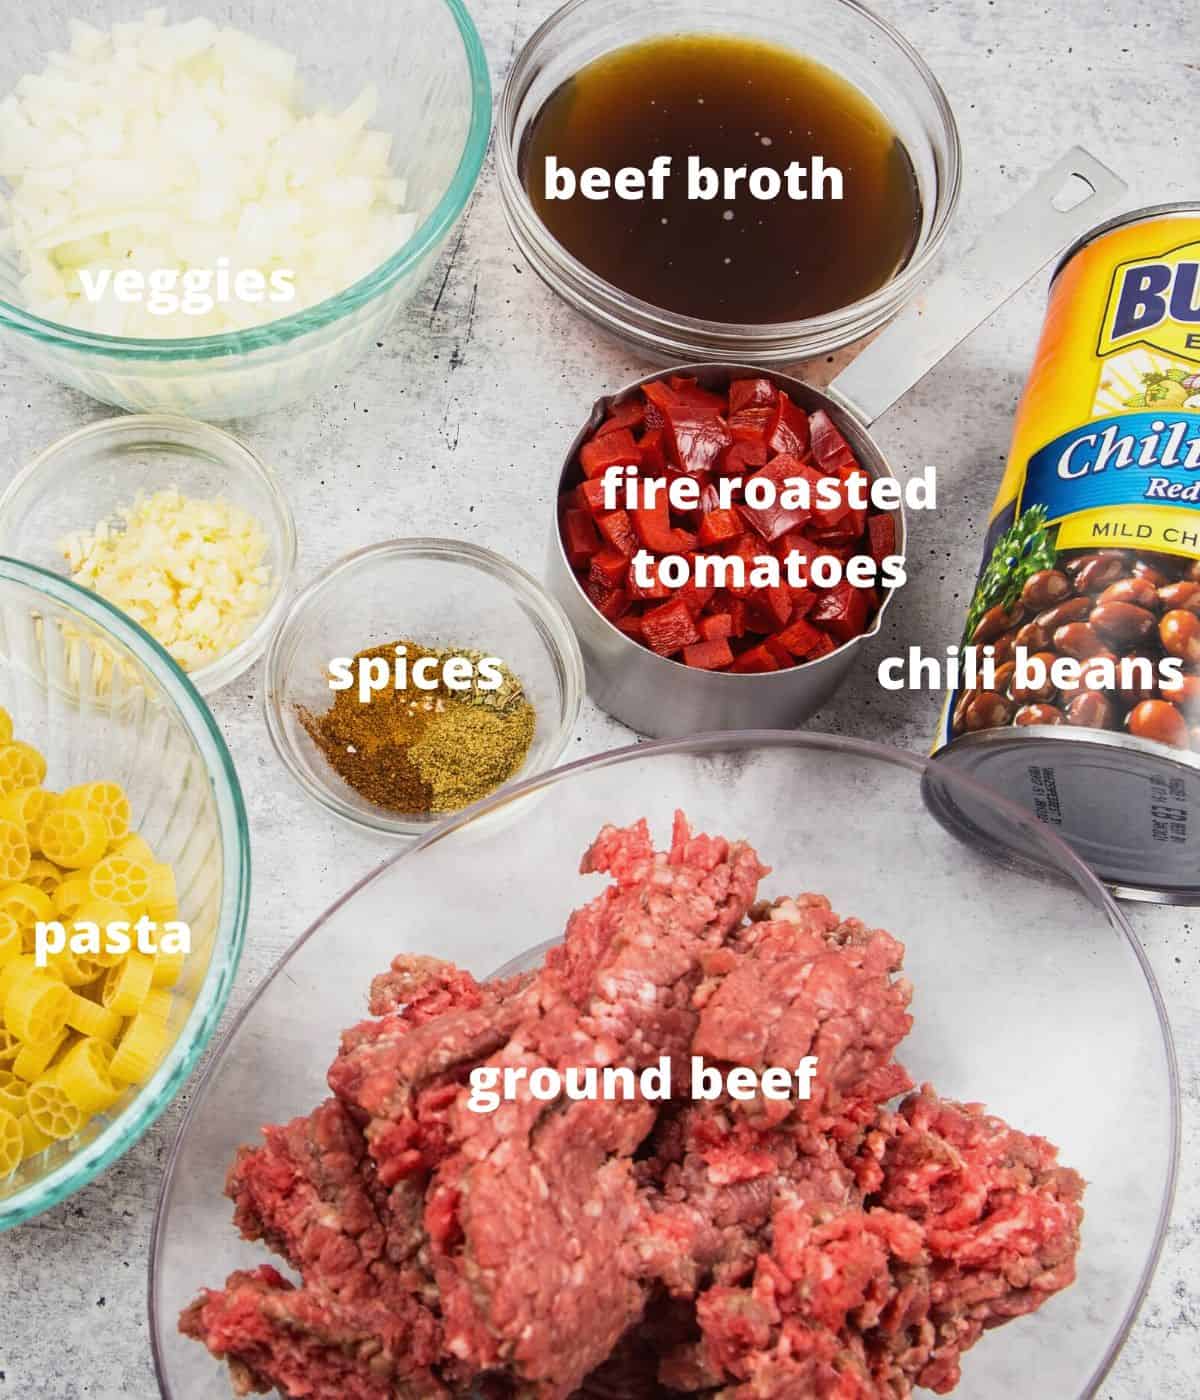 ingredients to make chili mac: beef broth, diced tomatoes, pasta, ground beef, spices, onion, cheese